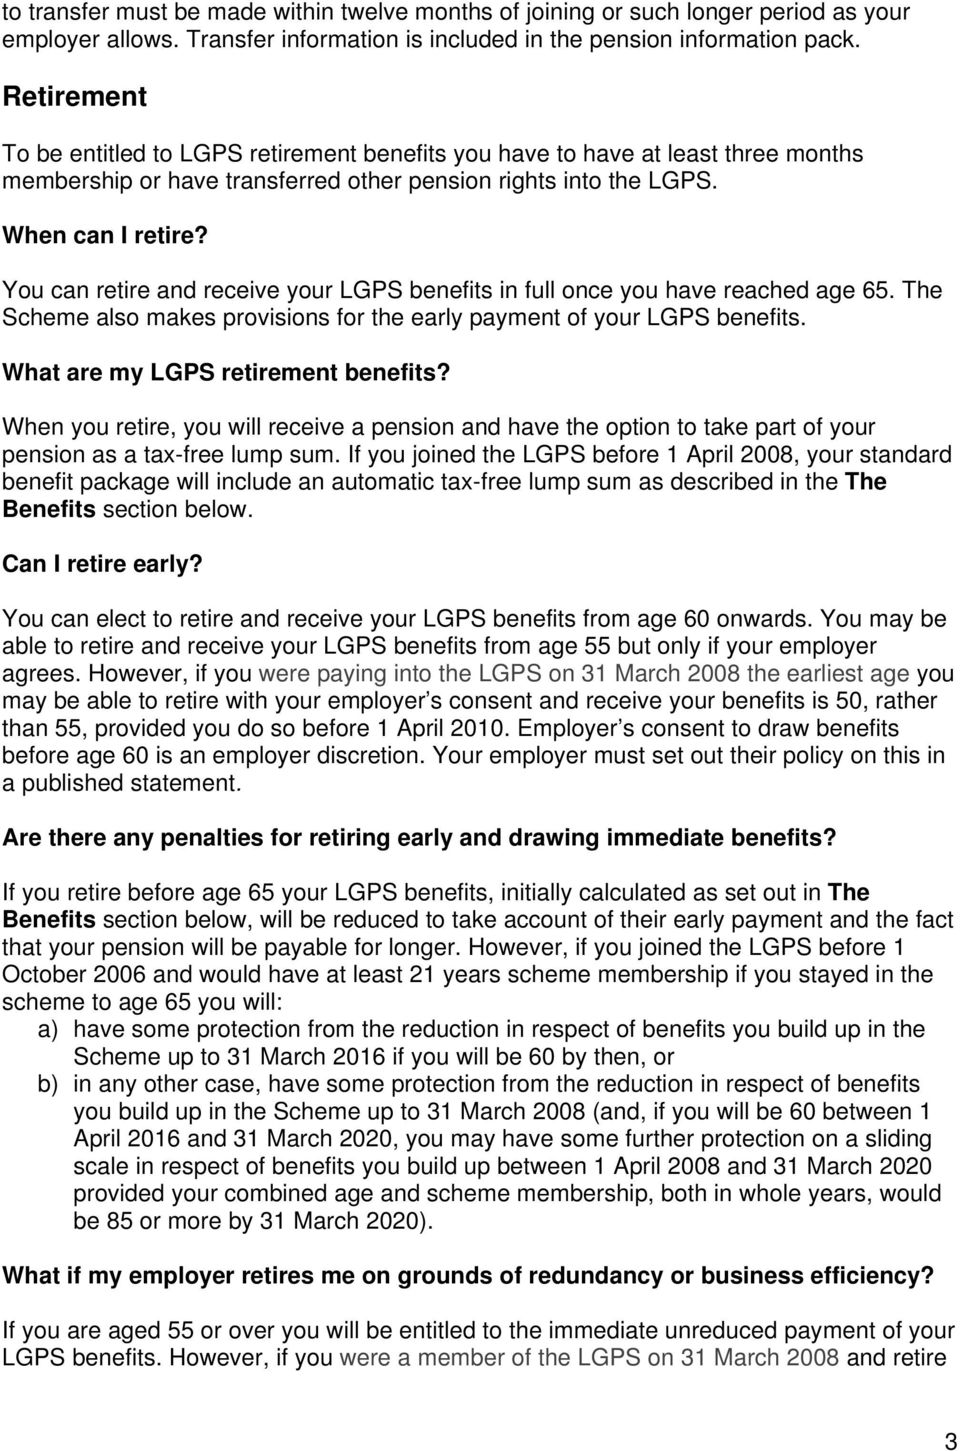 You can retire and receive your LGPS benefits in full once you have reached age 65. The Scheme also makes provisions for the early payment of your LGPS benefits. What are my LGPS retirement benefits?